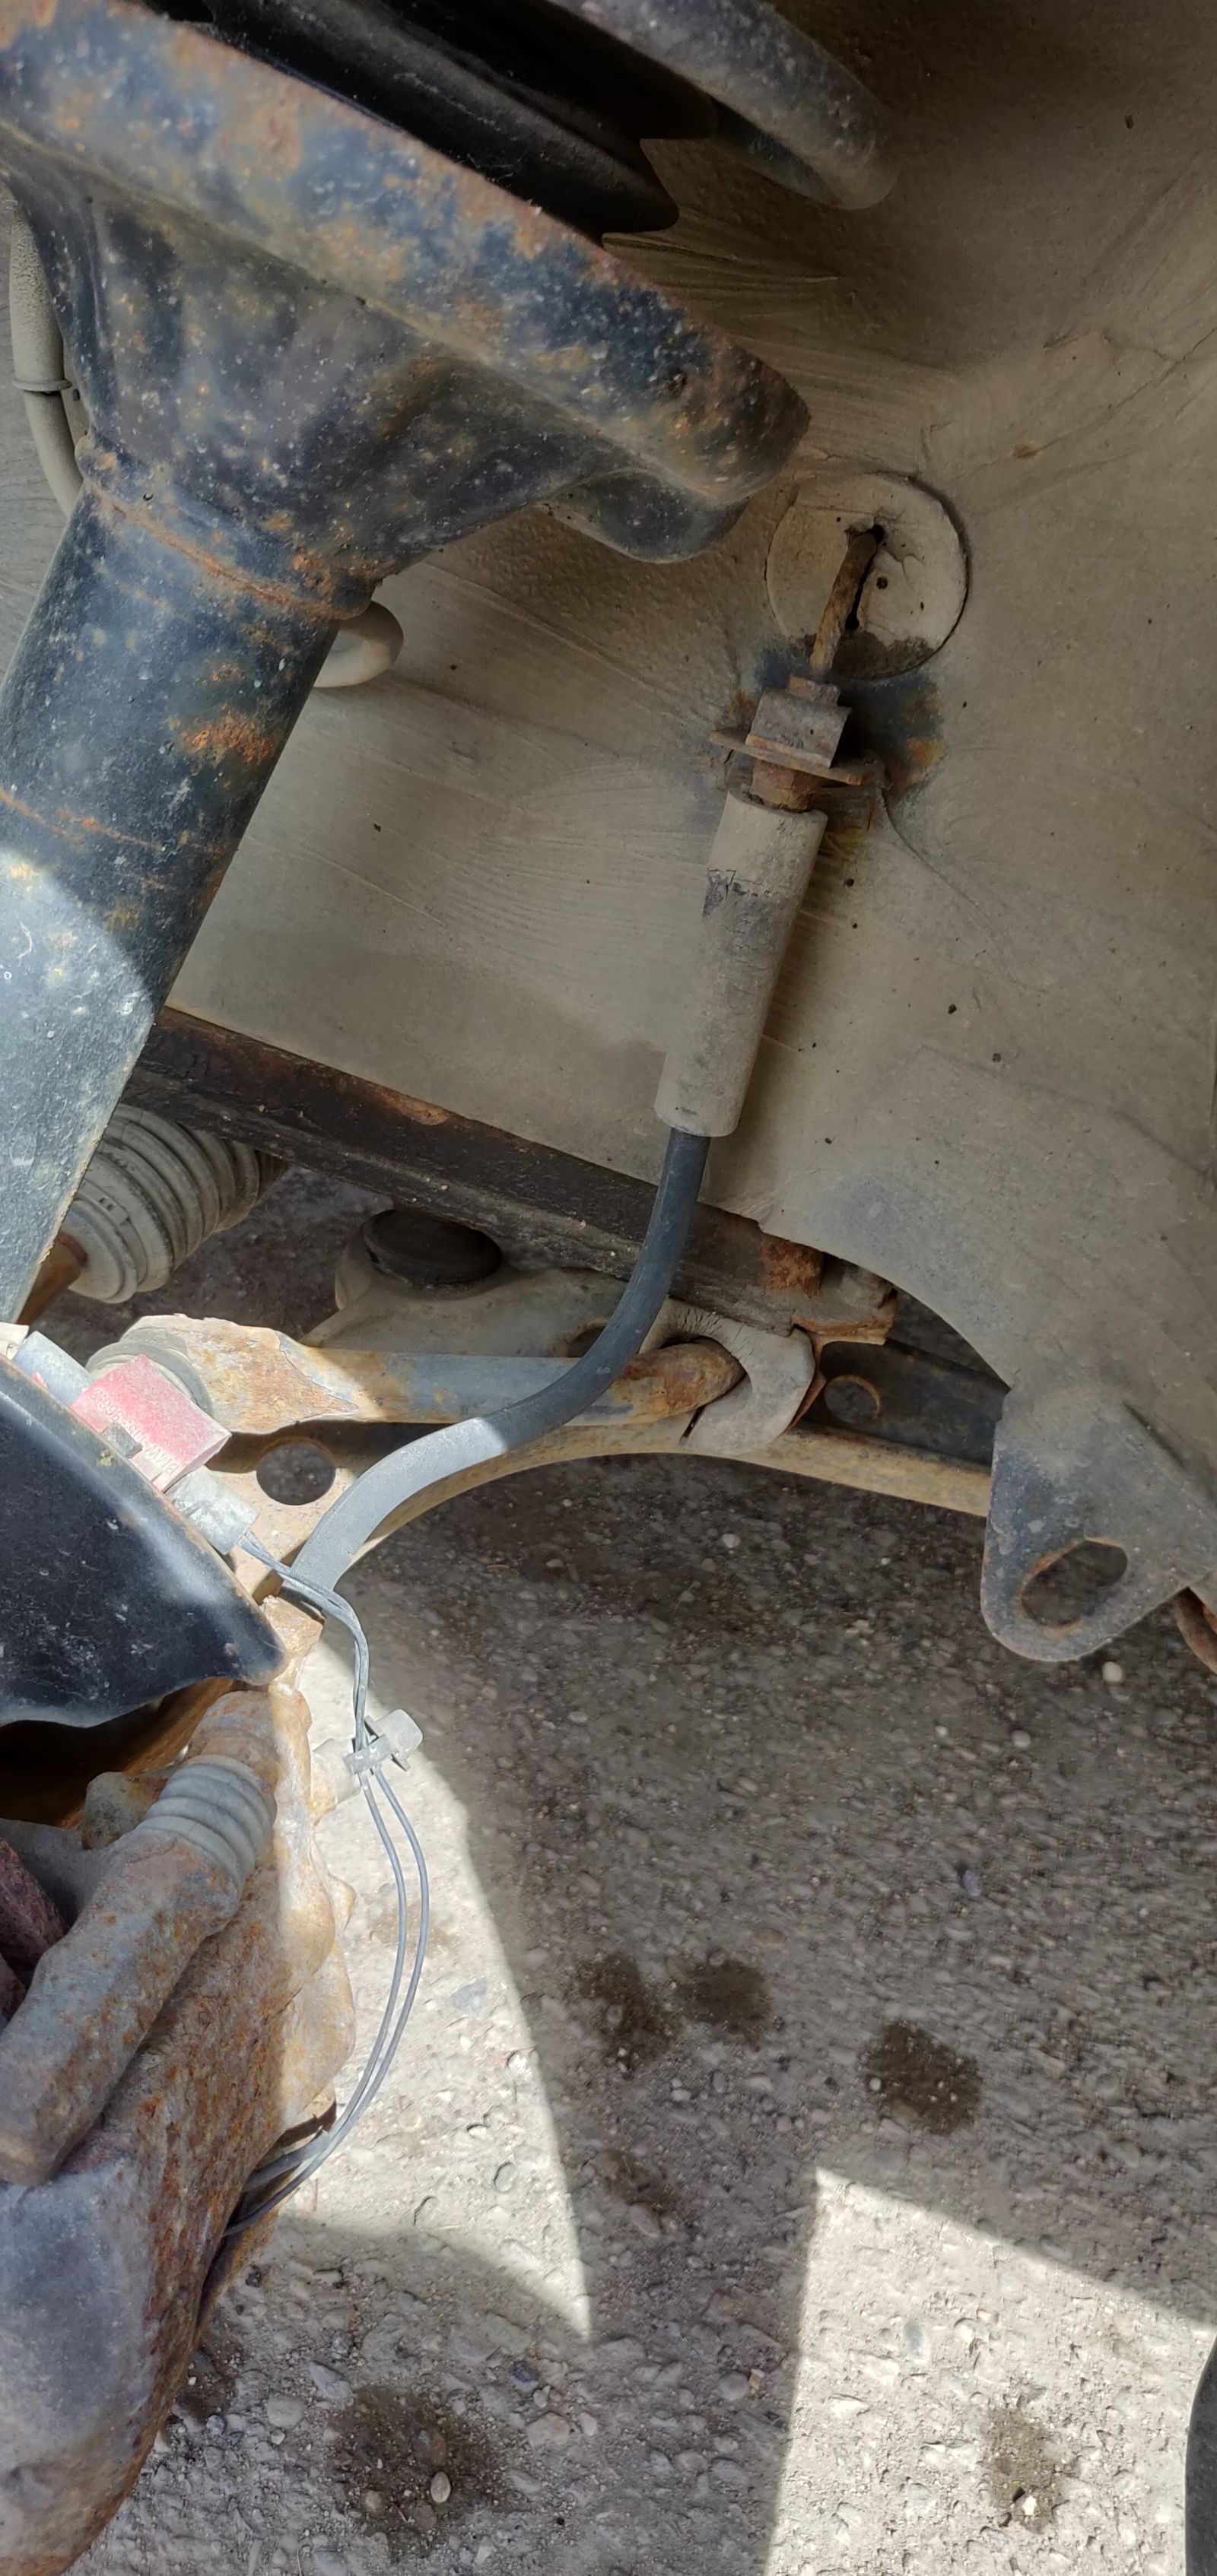 These swaybar bushings look bad. I might have to think about refreshing the suspensions rubber bits. 